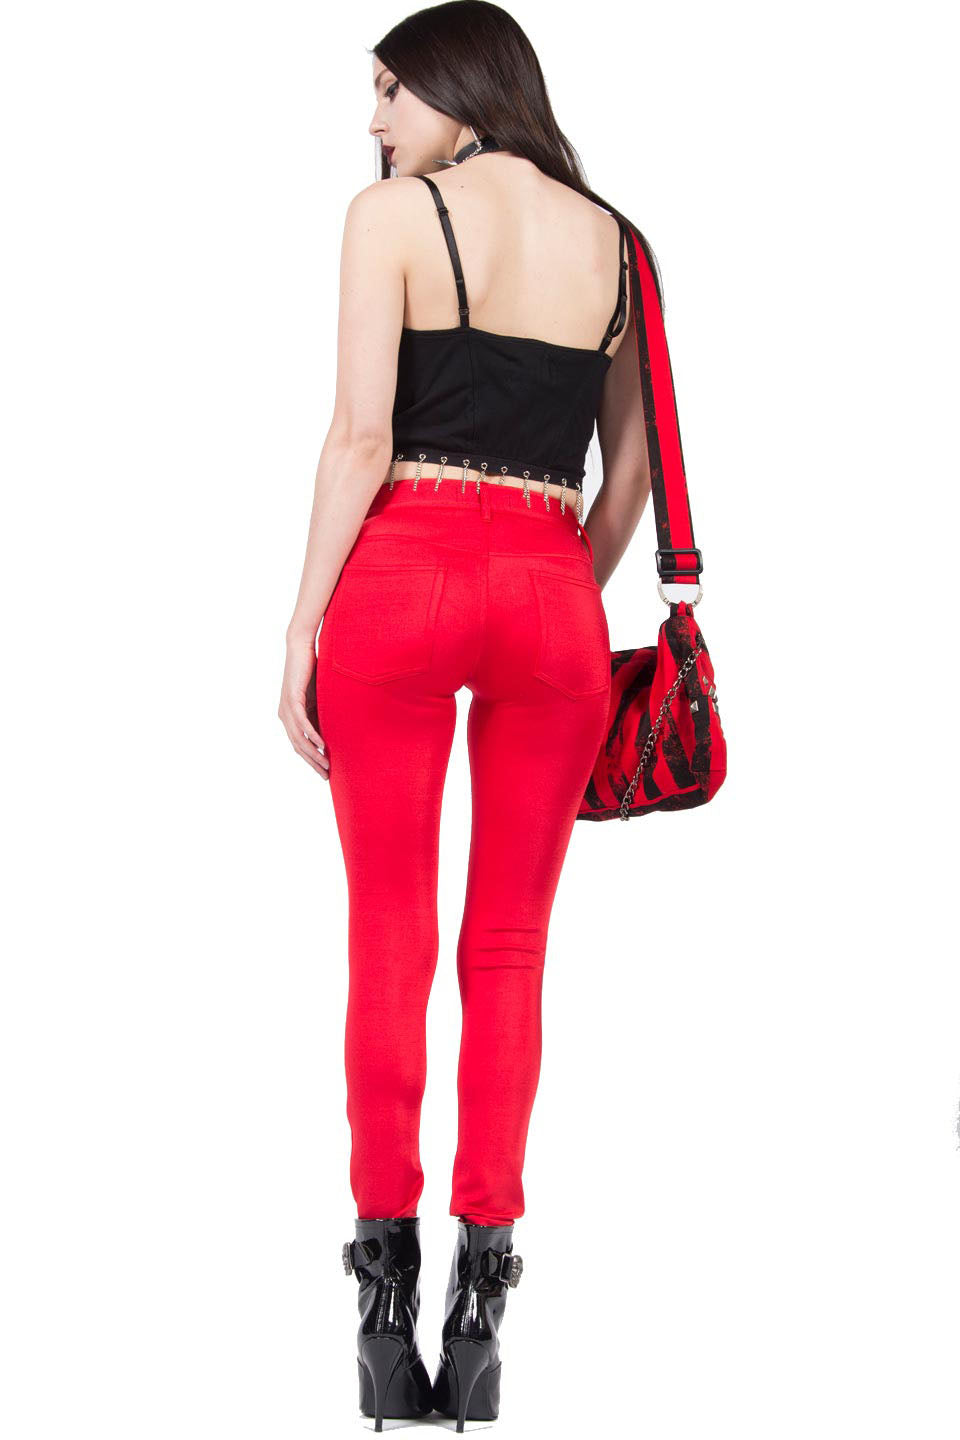 Straight From The Heart Red Glam Spandex Jean-Bottoms-Lip Service